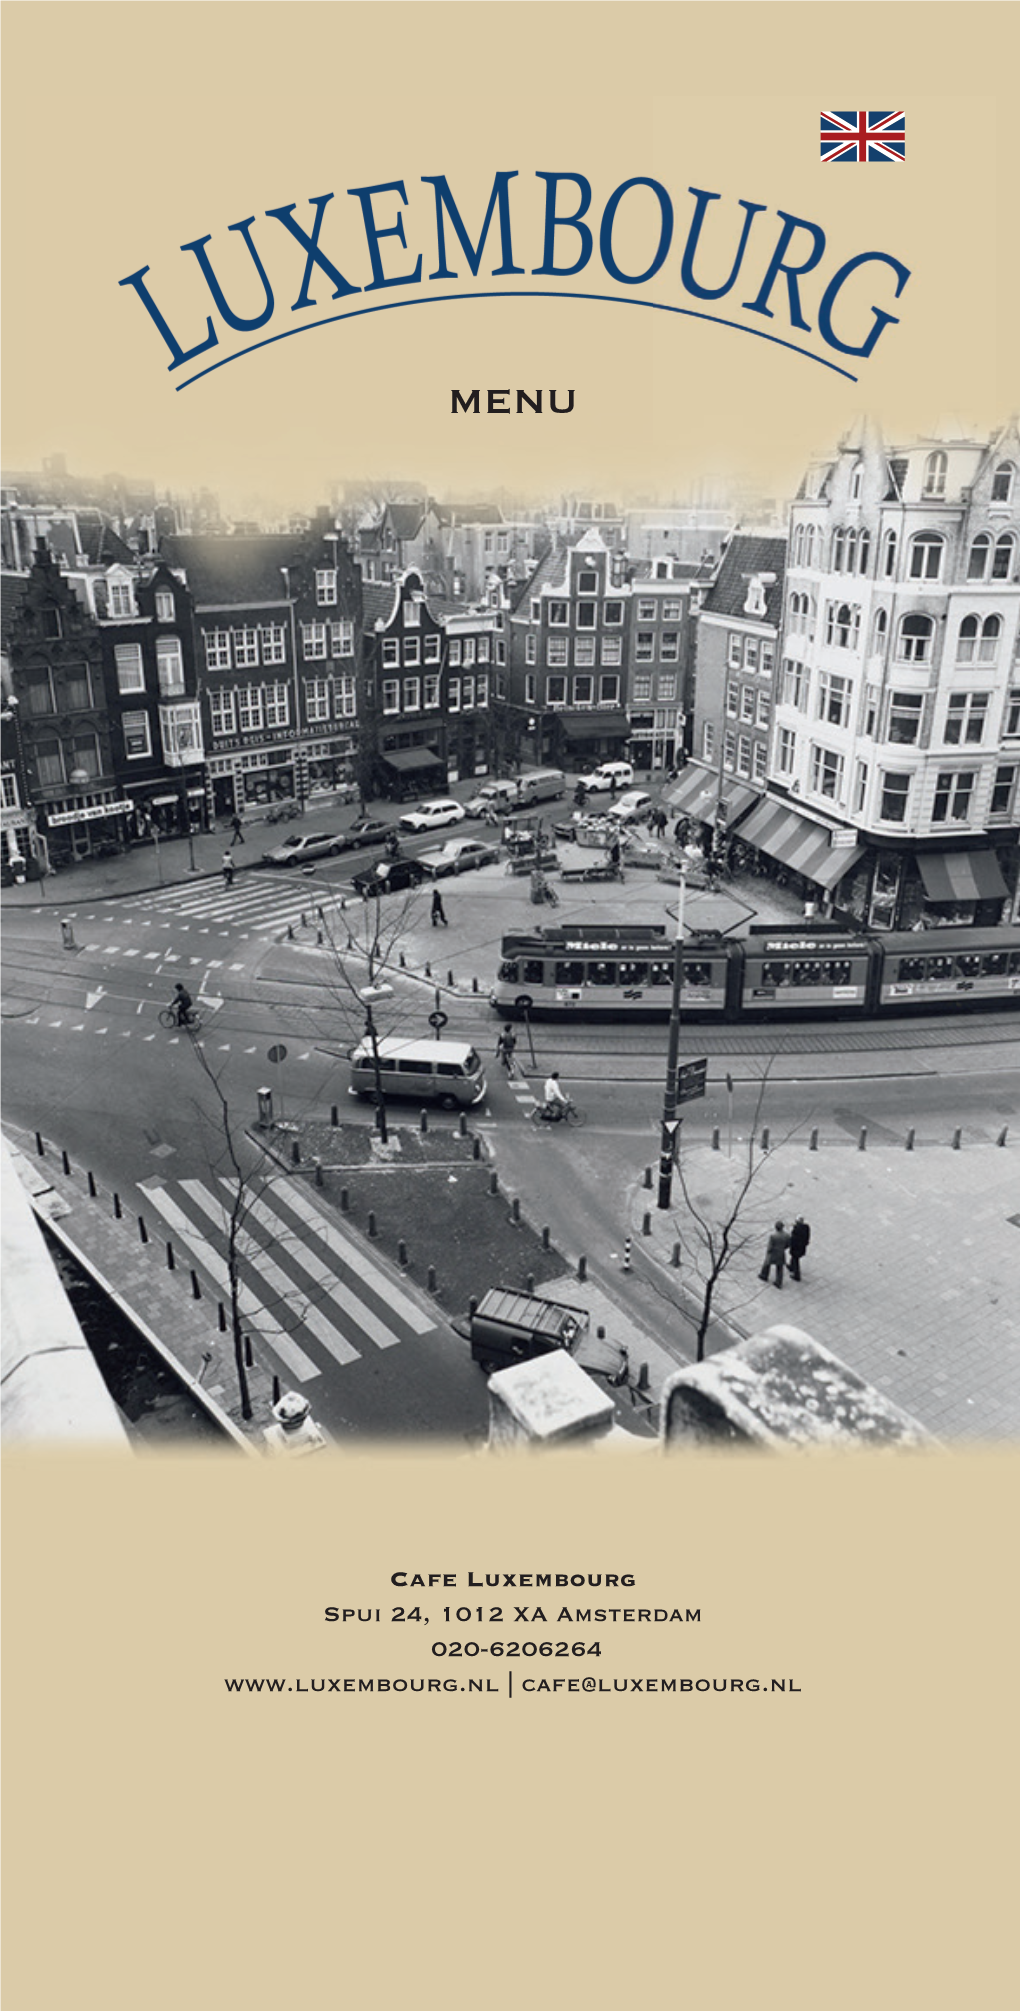 Cafe Luxembourg Spui 24, 1012 XA Amsterdam 020-6206264 | Cafe@Luxembourg.Nl UNE HISTOIRE D’AMOUR